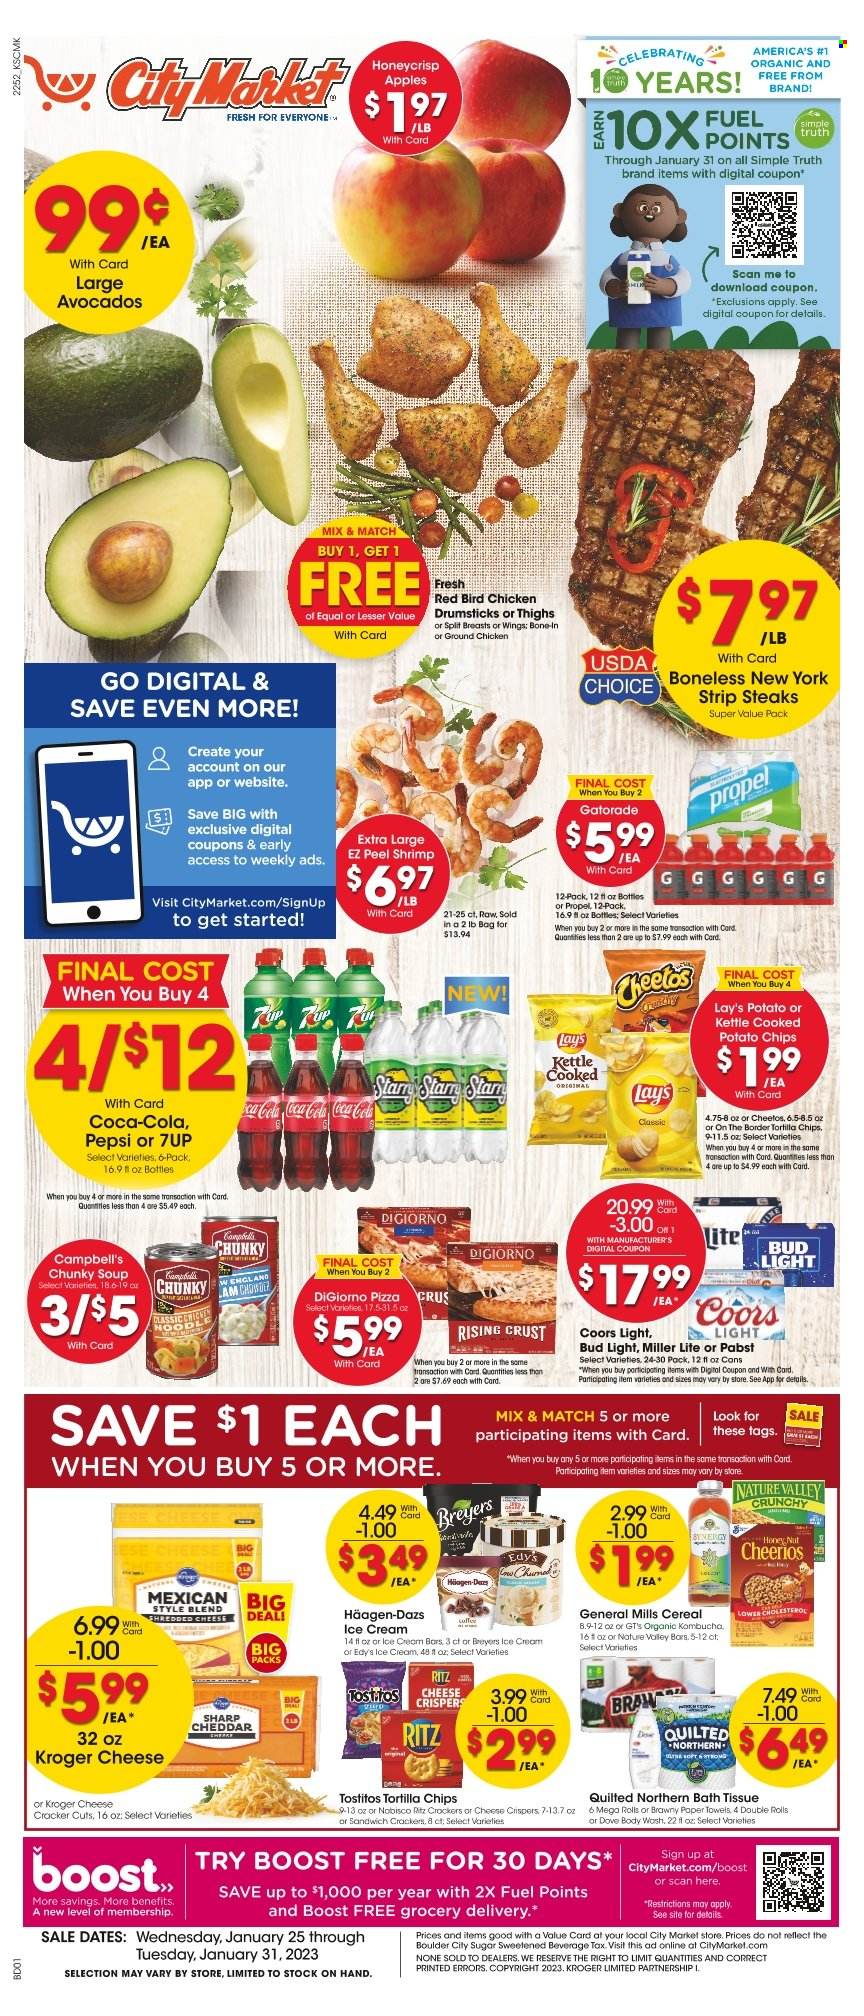 thumbnail - City Market Flyer - 01/25/2023 - 01/31/2023 - Sales products - apples, avocado, shrimps, Campbell's, pizza, soup, shredded cheese, ice cream, ice cream bars, Häagen-Dazs, Dove, crackers, RITZ, tortilla chips, potato chips, Cheetos, chips, Lay’s, Tostitos, sugar, cereals, Cheerios, Nature Valley, Coca-Cola, Pepsi, 7UP, Gatorade, kombucha, Boost, beer, Bud Light, ground chicken, chicken drumsticks, beef meat, steak, striploin steak, bath tissue, Quilted Northern, kitchen towels, paper towels, body wash, Miller Lite, Coors. Page 1.